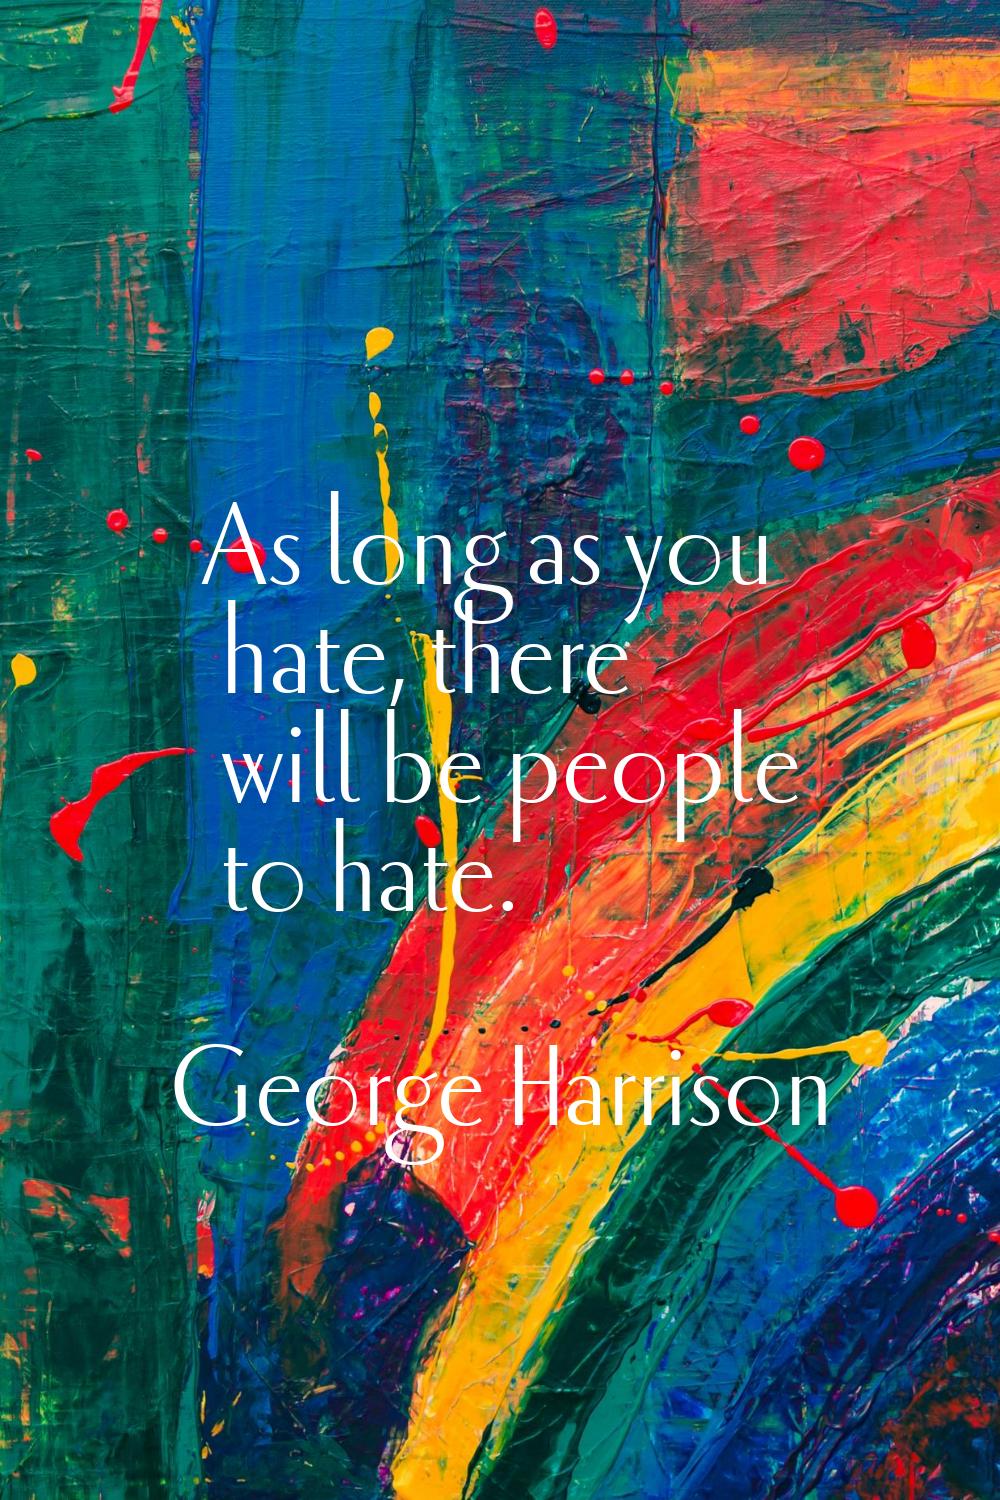 As long as you hate, there will be people to hate.